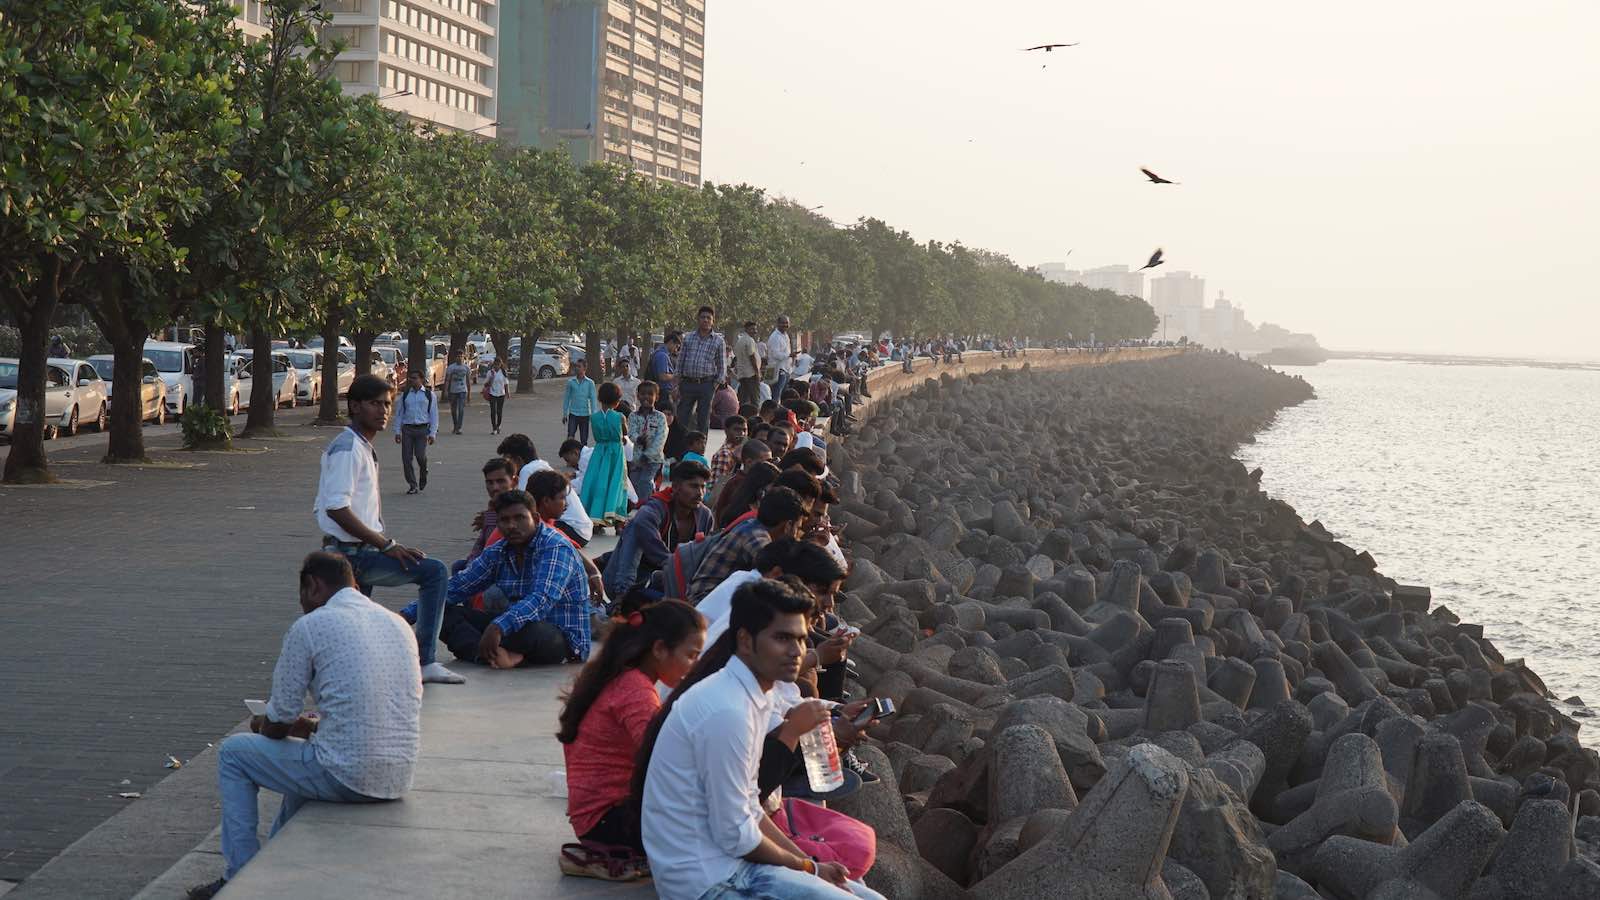 Back to the main city, I went to a place called Marine Drive along the coast of Mumbai to catch the sunset.